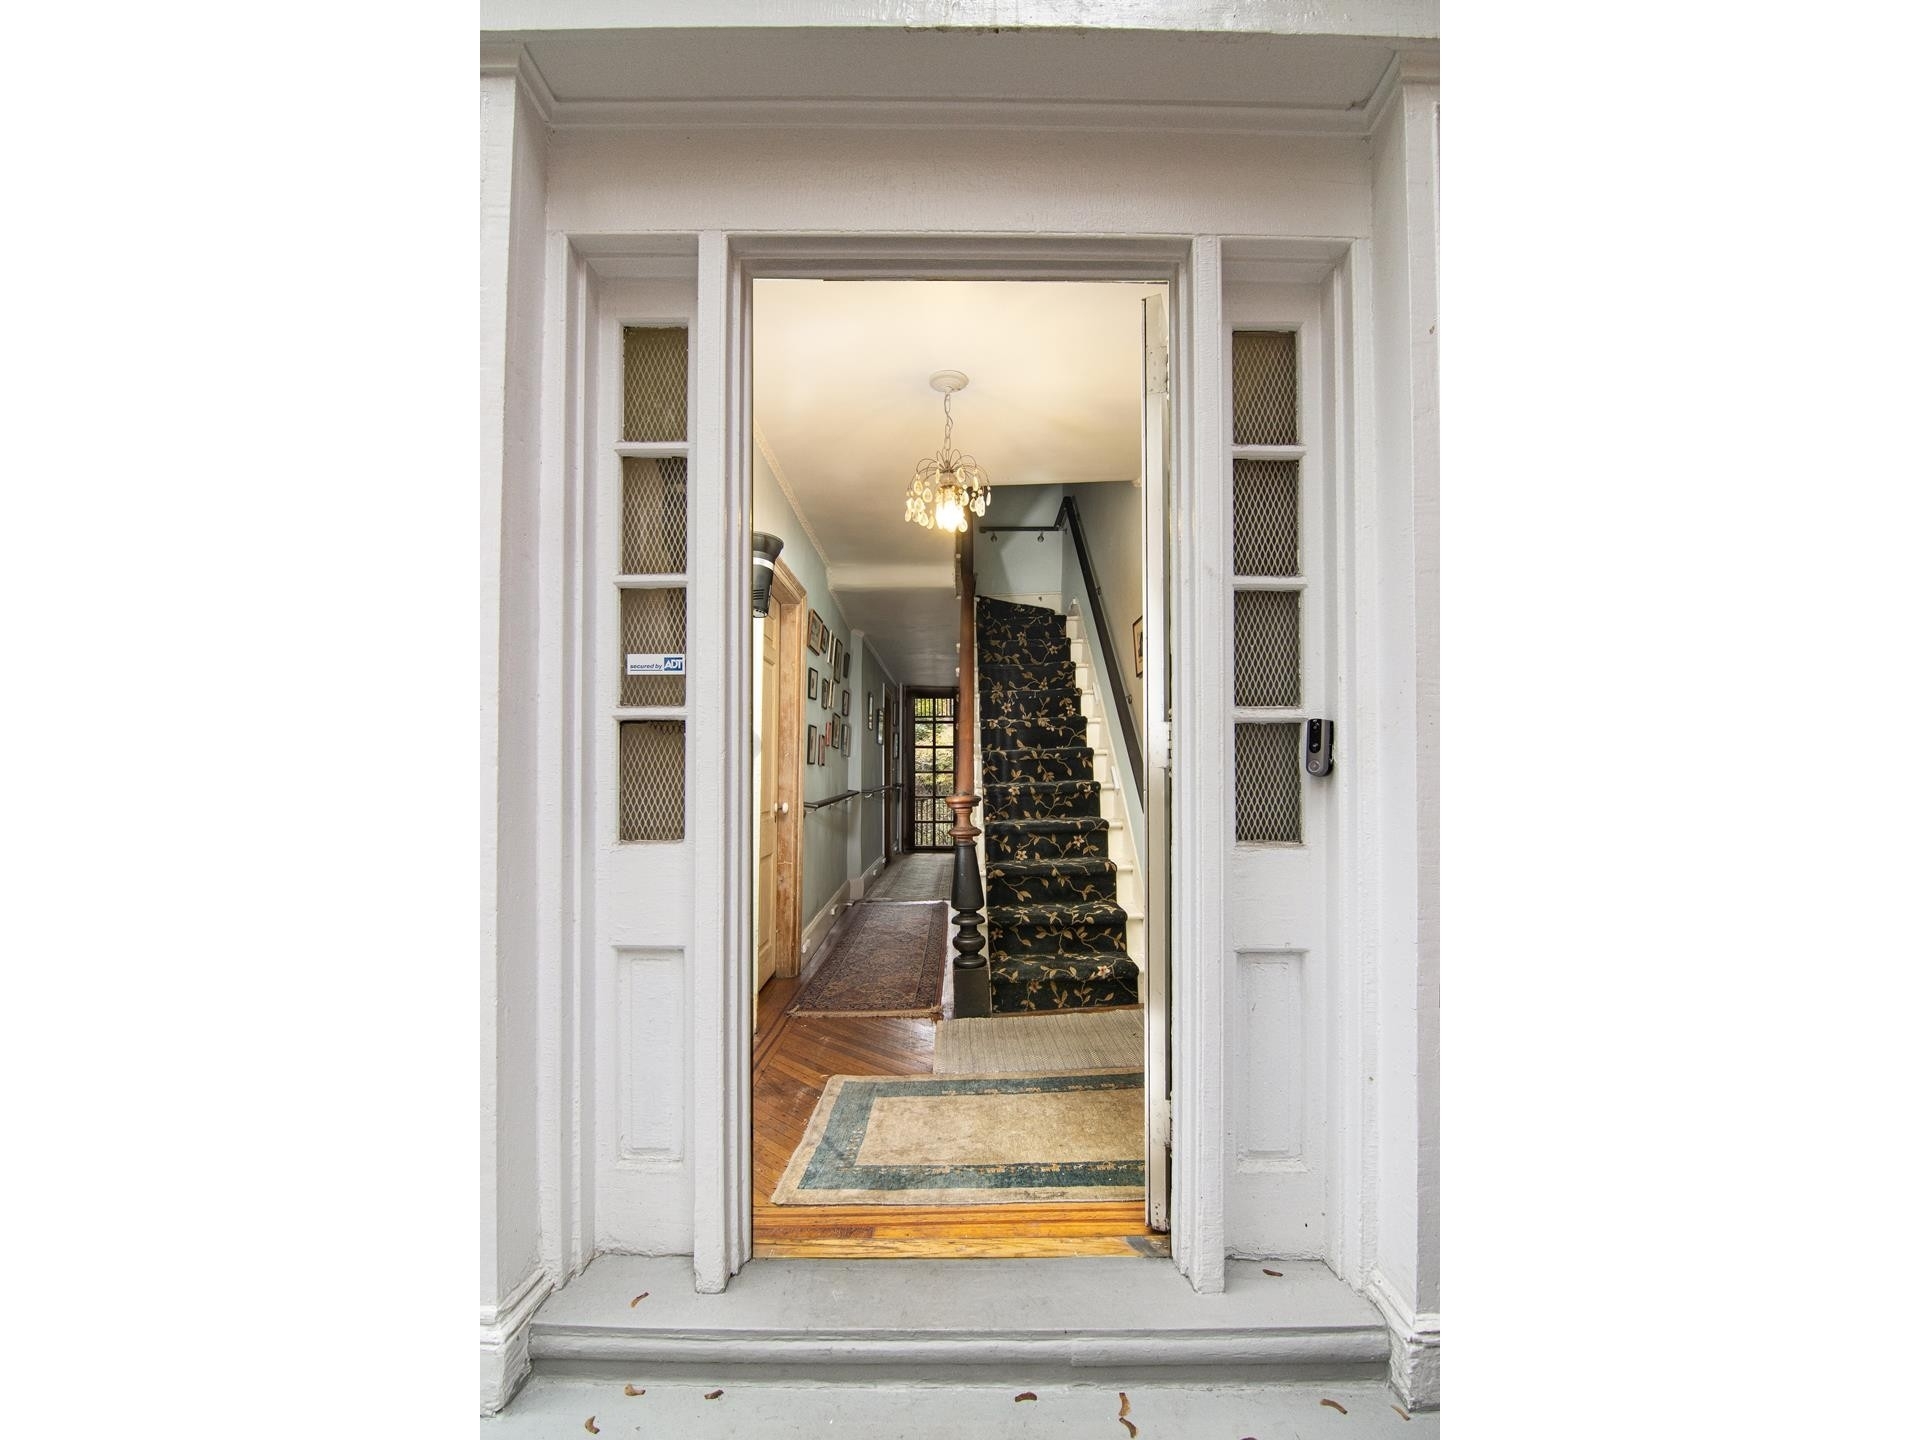 7. Single Family Townhouse for Sale at 69 ORANGE ST, TOWNHOUSE Brooklyn Heights, Brooklyn, NY 11201